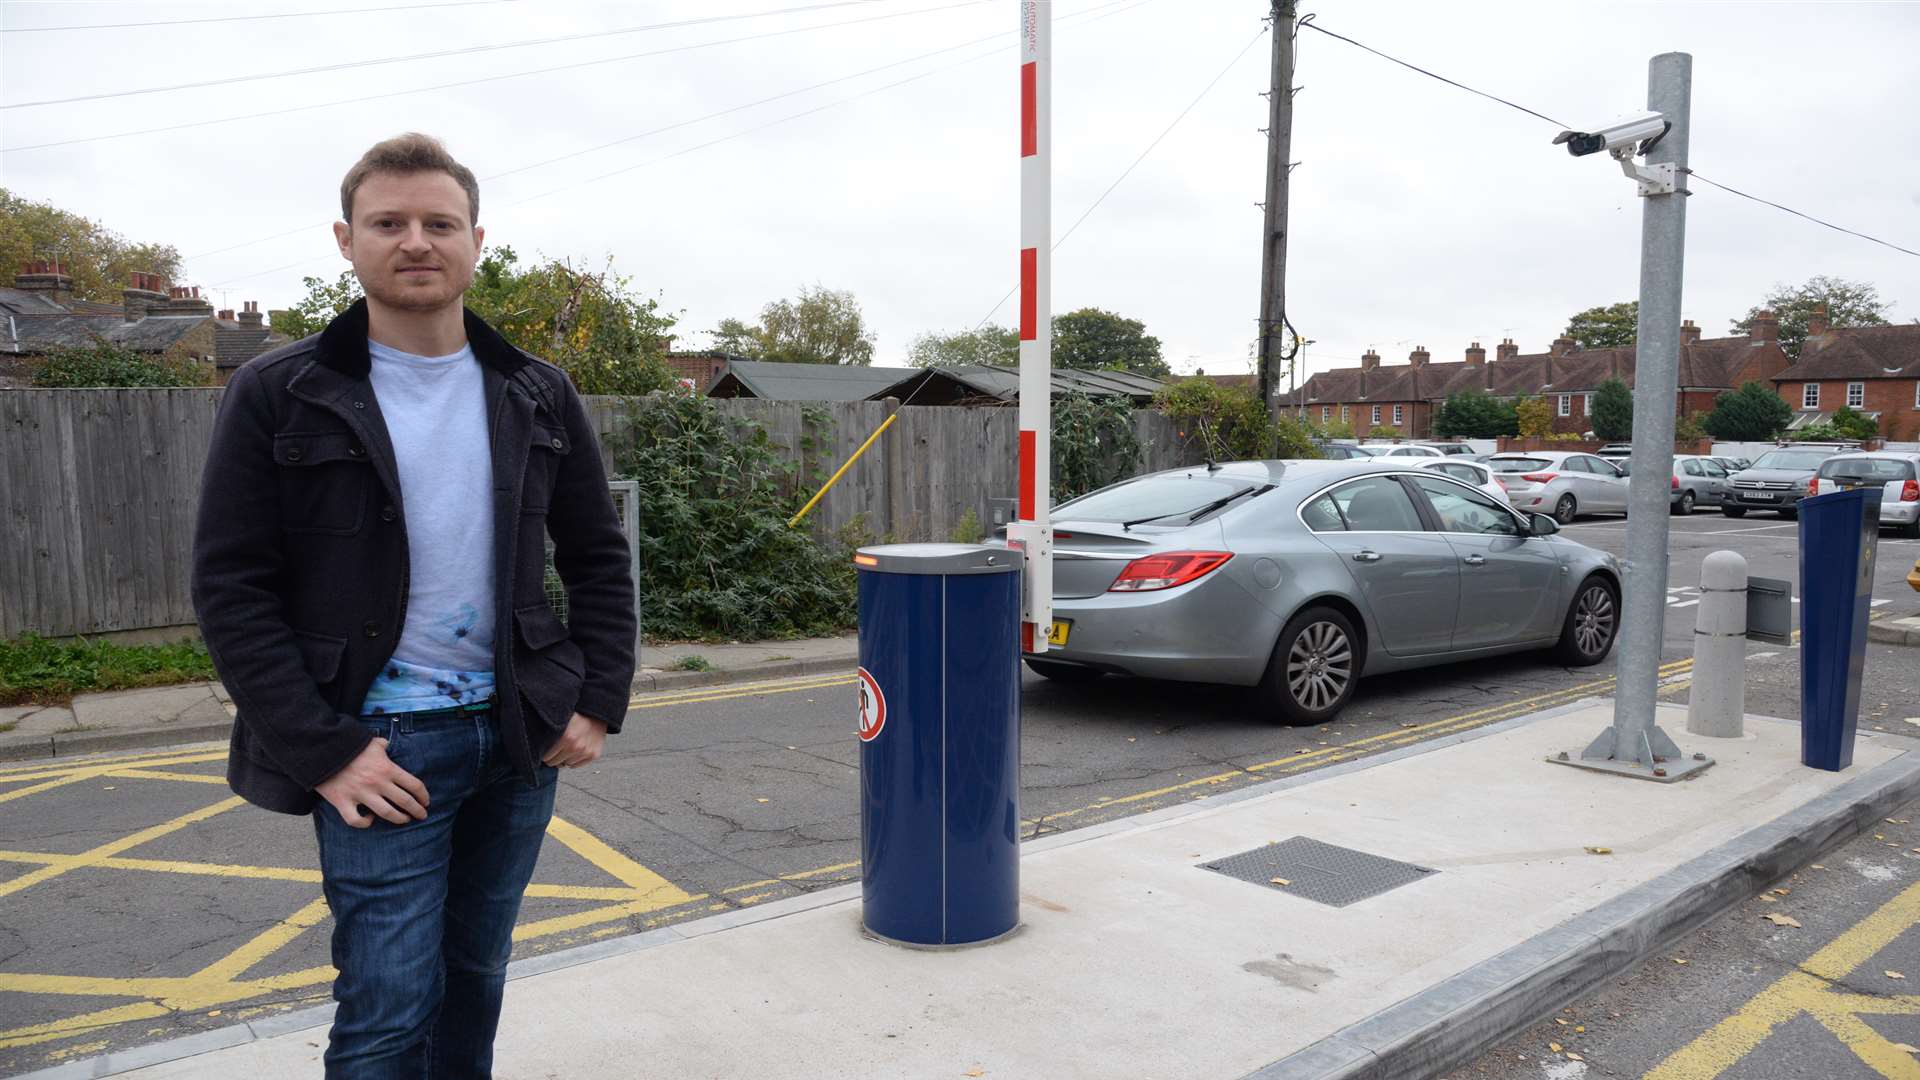 Cllr Ben-Fitter Harding and the ANPR barriers at Pound Lane car park, Canterbury